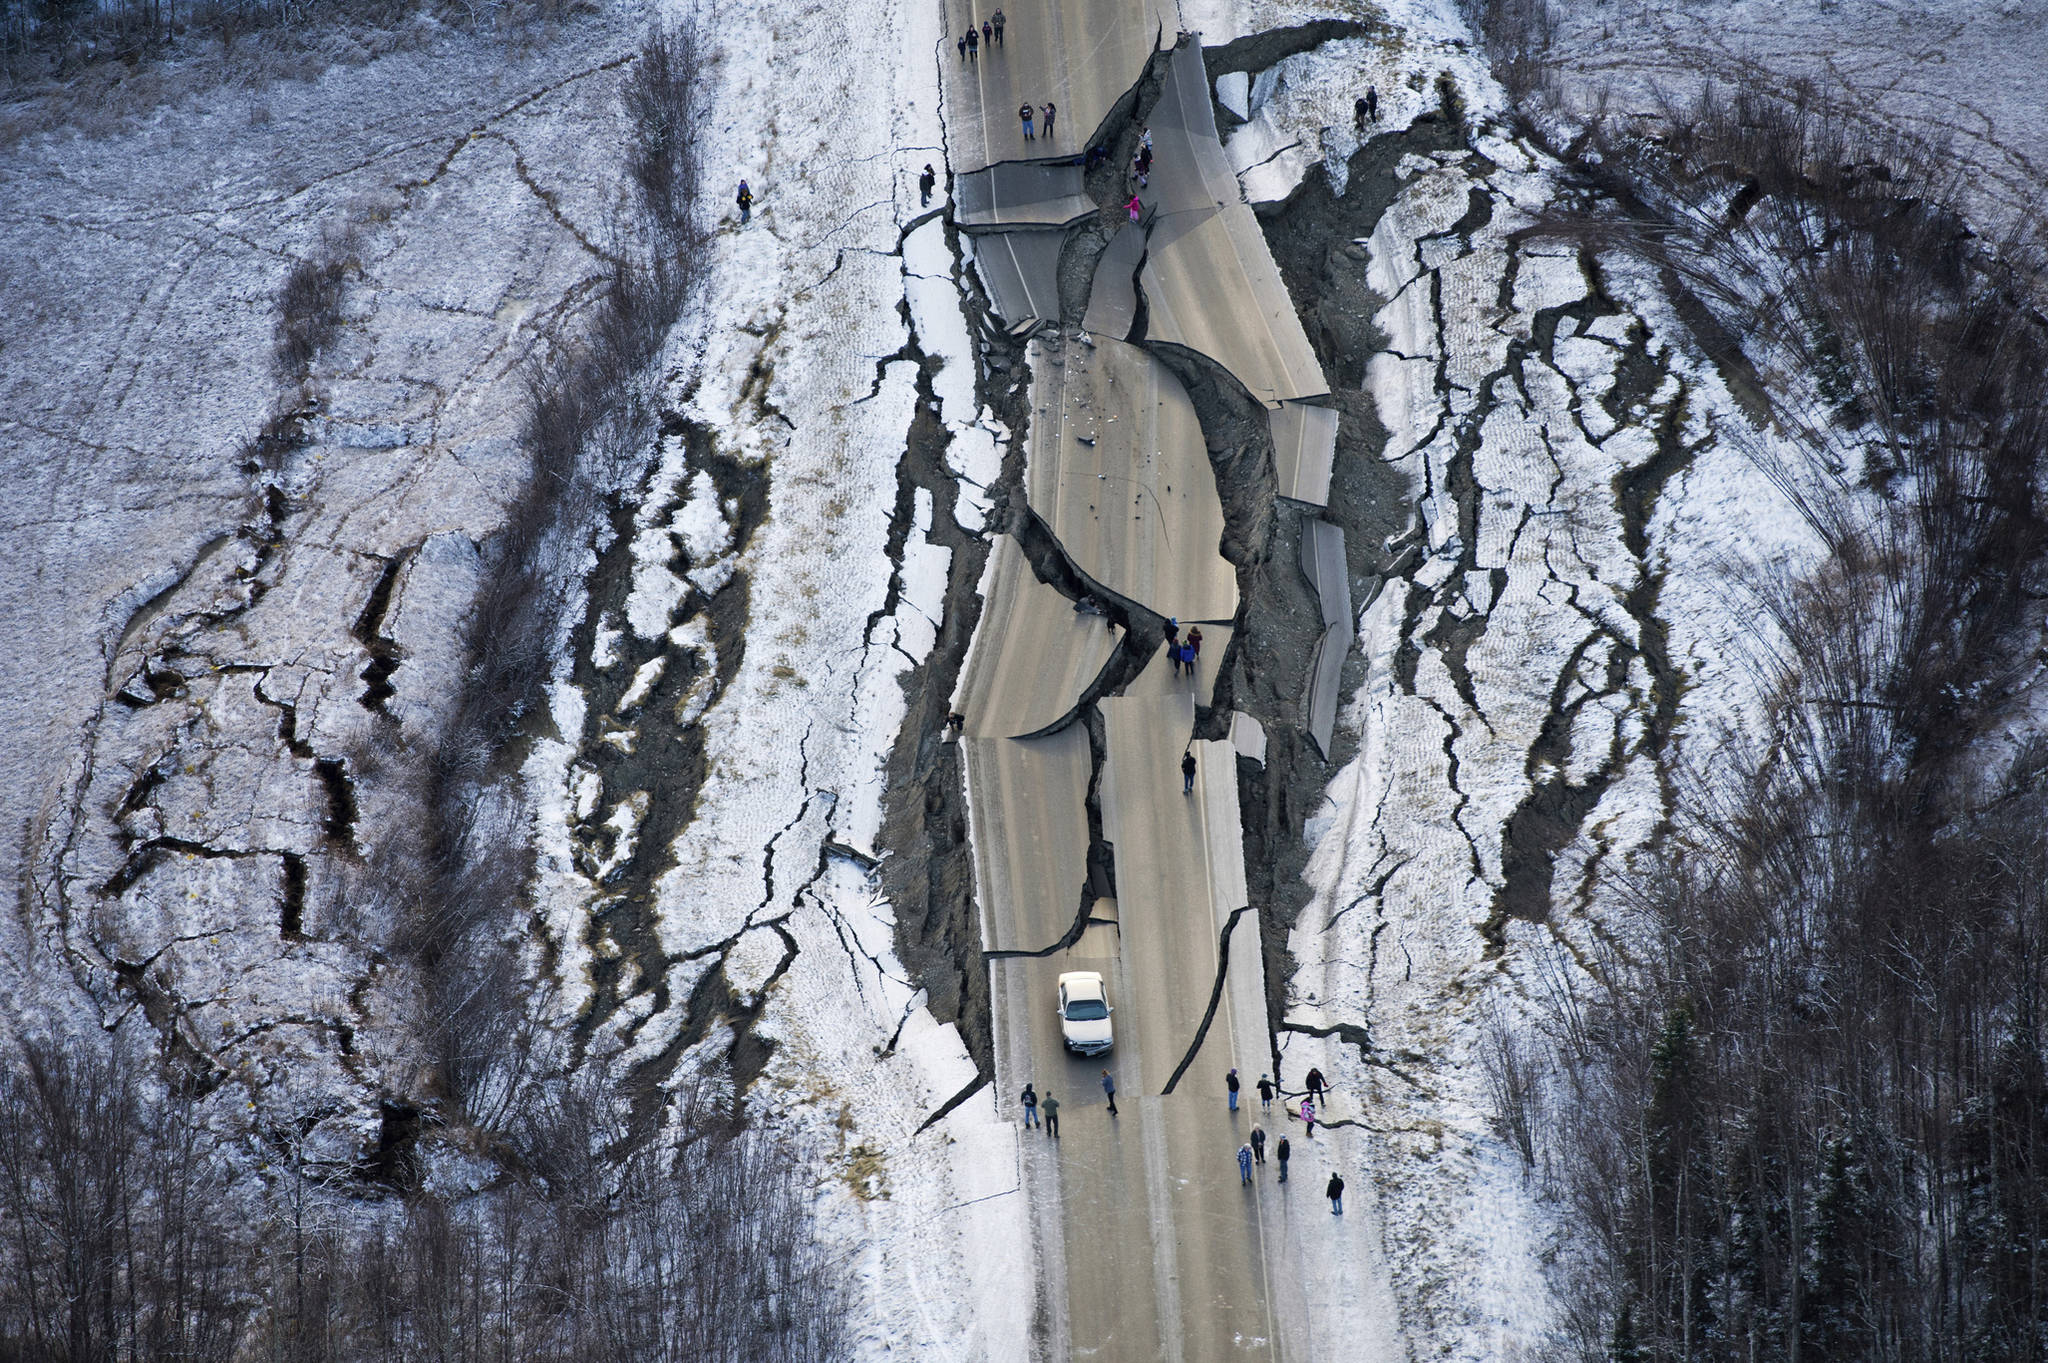 This Nov. 30, 2018 photo shows earthquake damage on Vine Road, south of Wasilla, Alaska. (Marc Lester | Anchorage Daily News via the Associated Press)